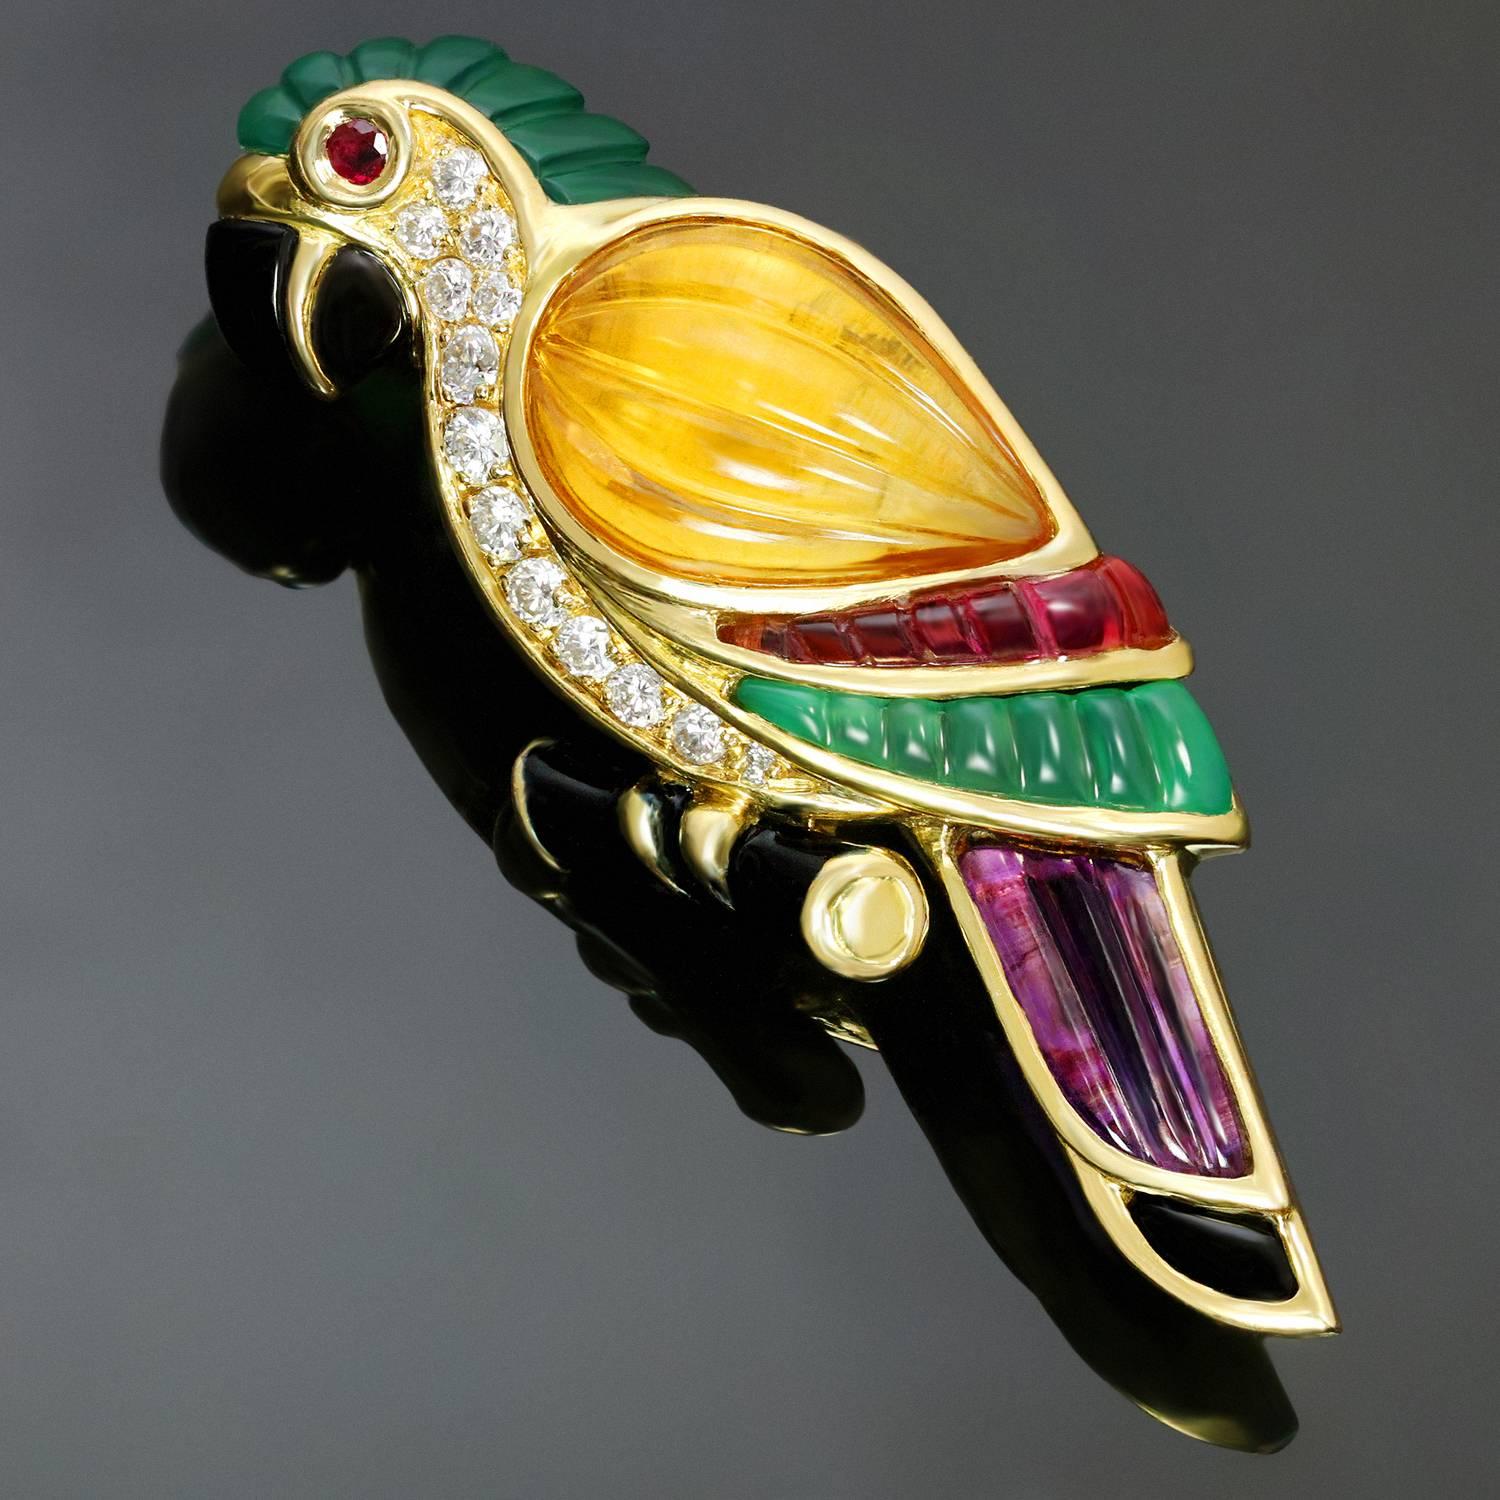 This stunning rare Van Cleef & Arpels brooch features a shape of a vibrant parrot bird crafted in 18k yellow features and set with brilliant-cut round diamonds, faceted ruby, amethyst, citrine, and pink and green tourmaline. Stamped with VCA maker's